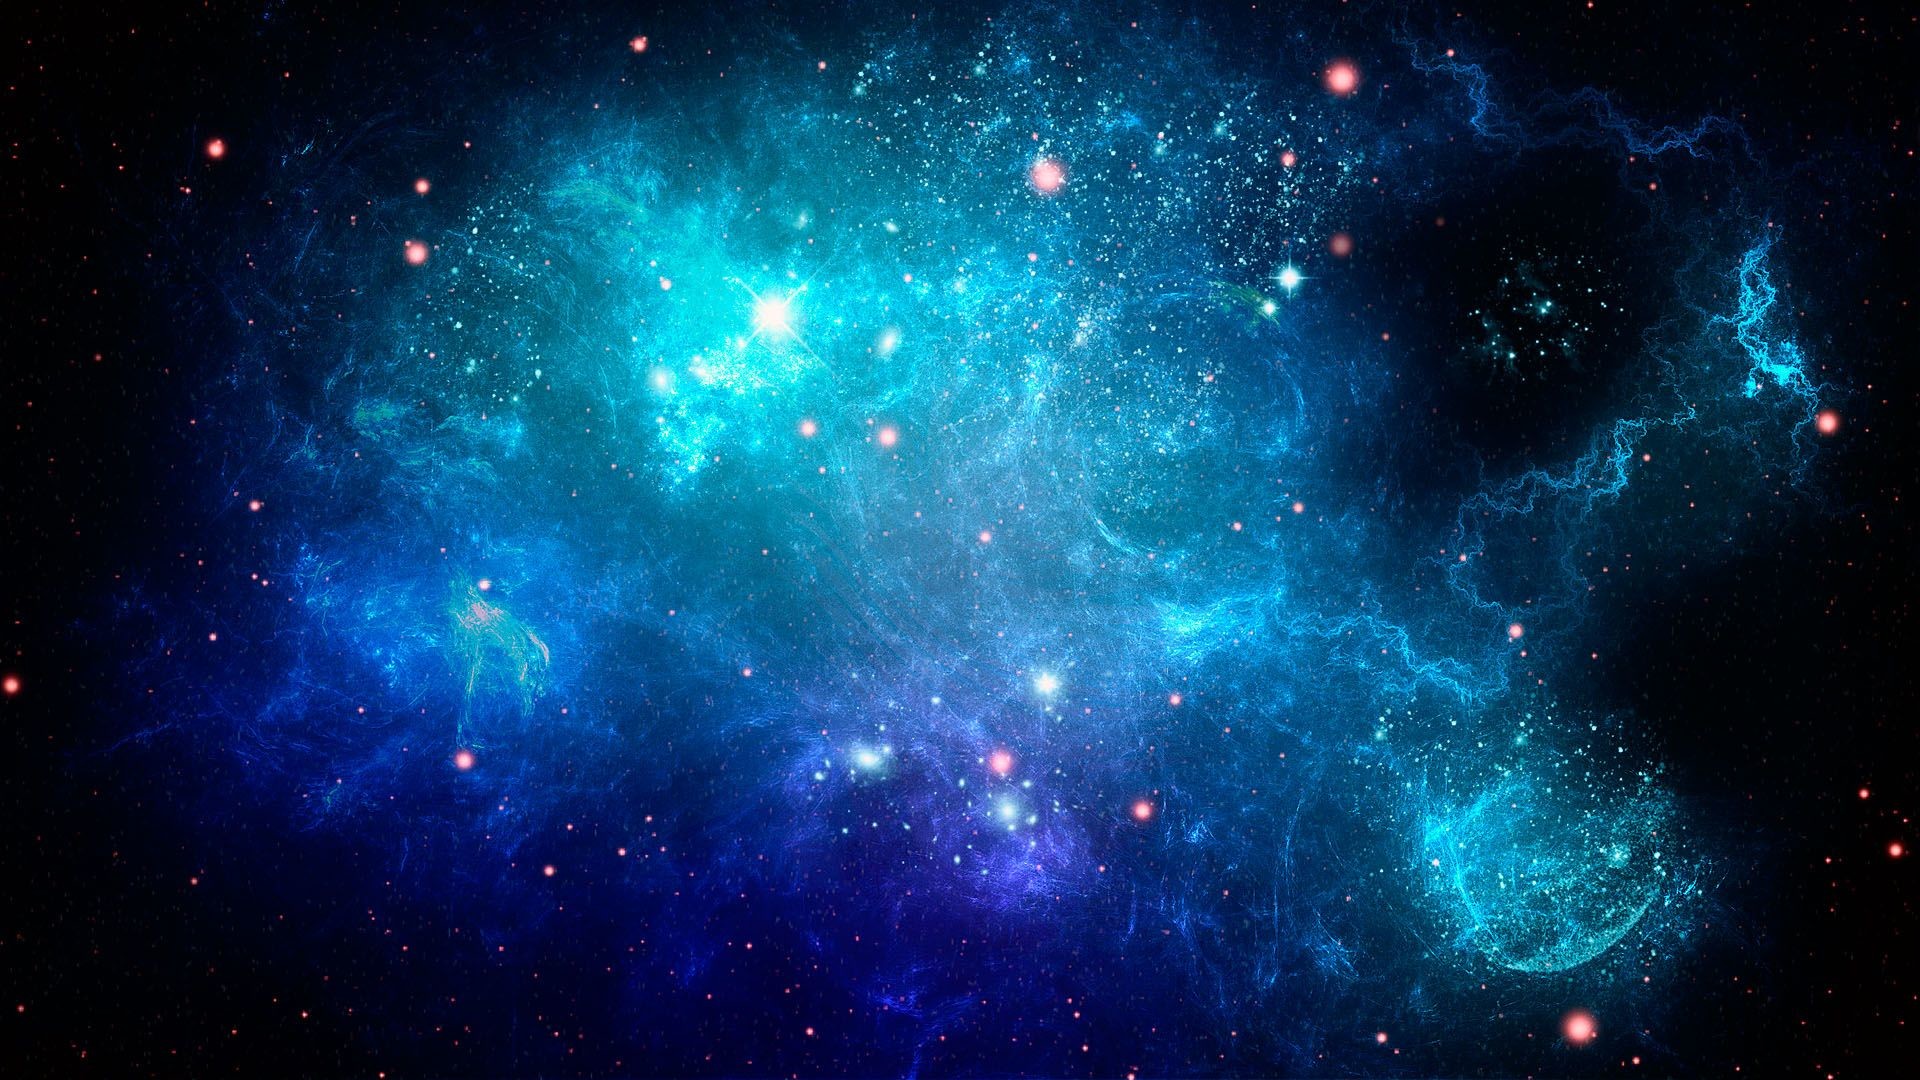 Space Star Composing wallpaper / Wallpaper Space 1252 high quality .